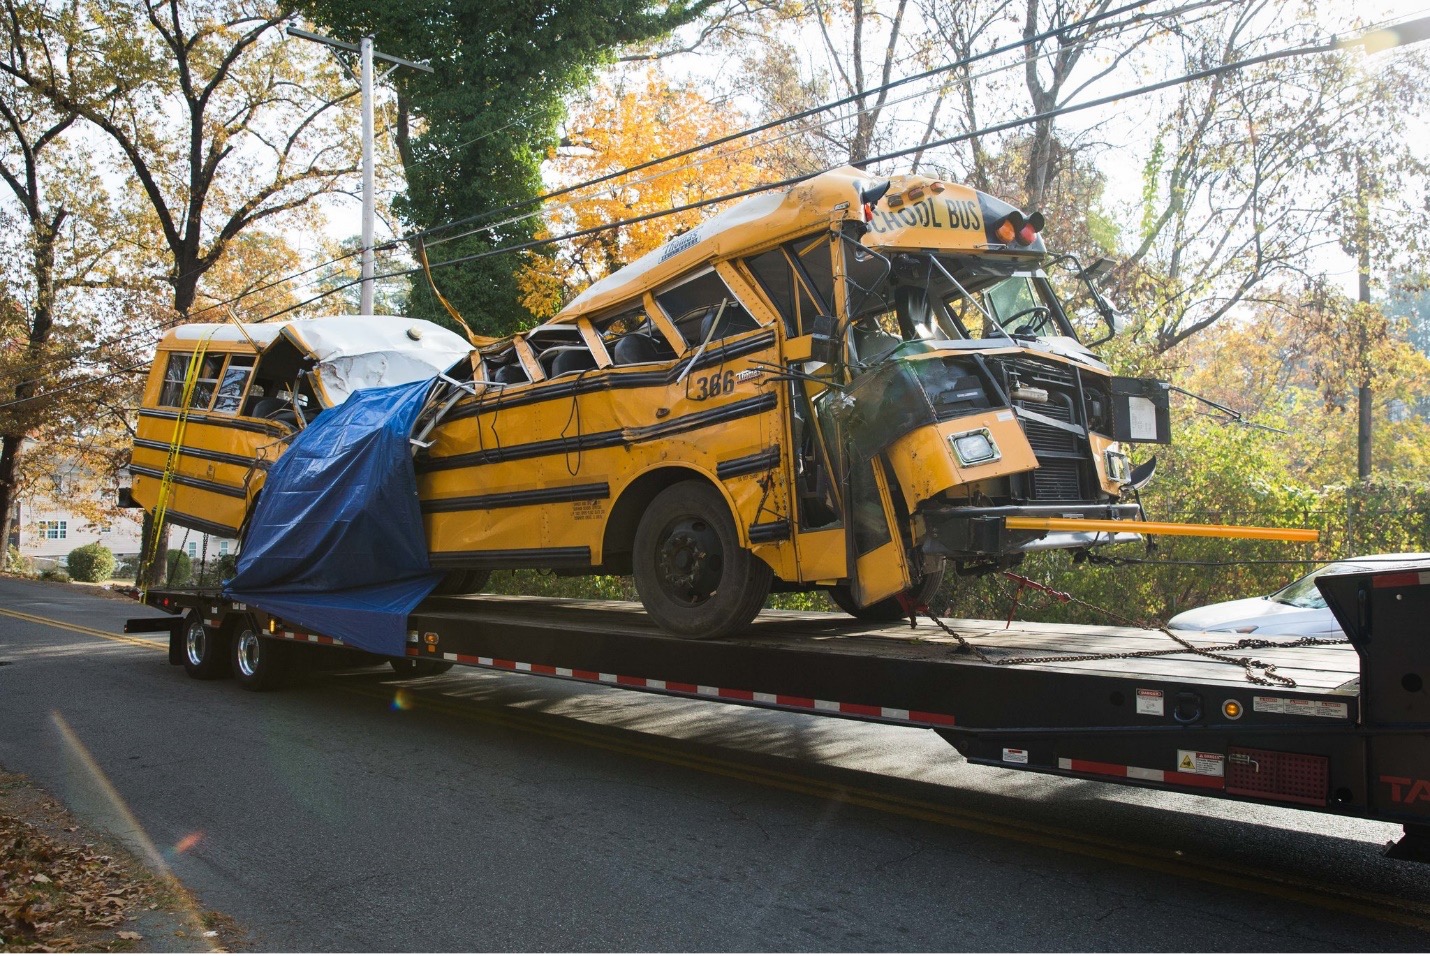 a severely damaged and crumpled school bus on the bed of a tow truck trailer